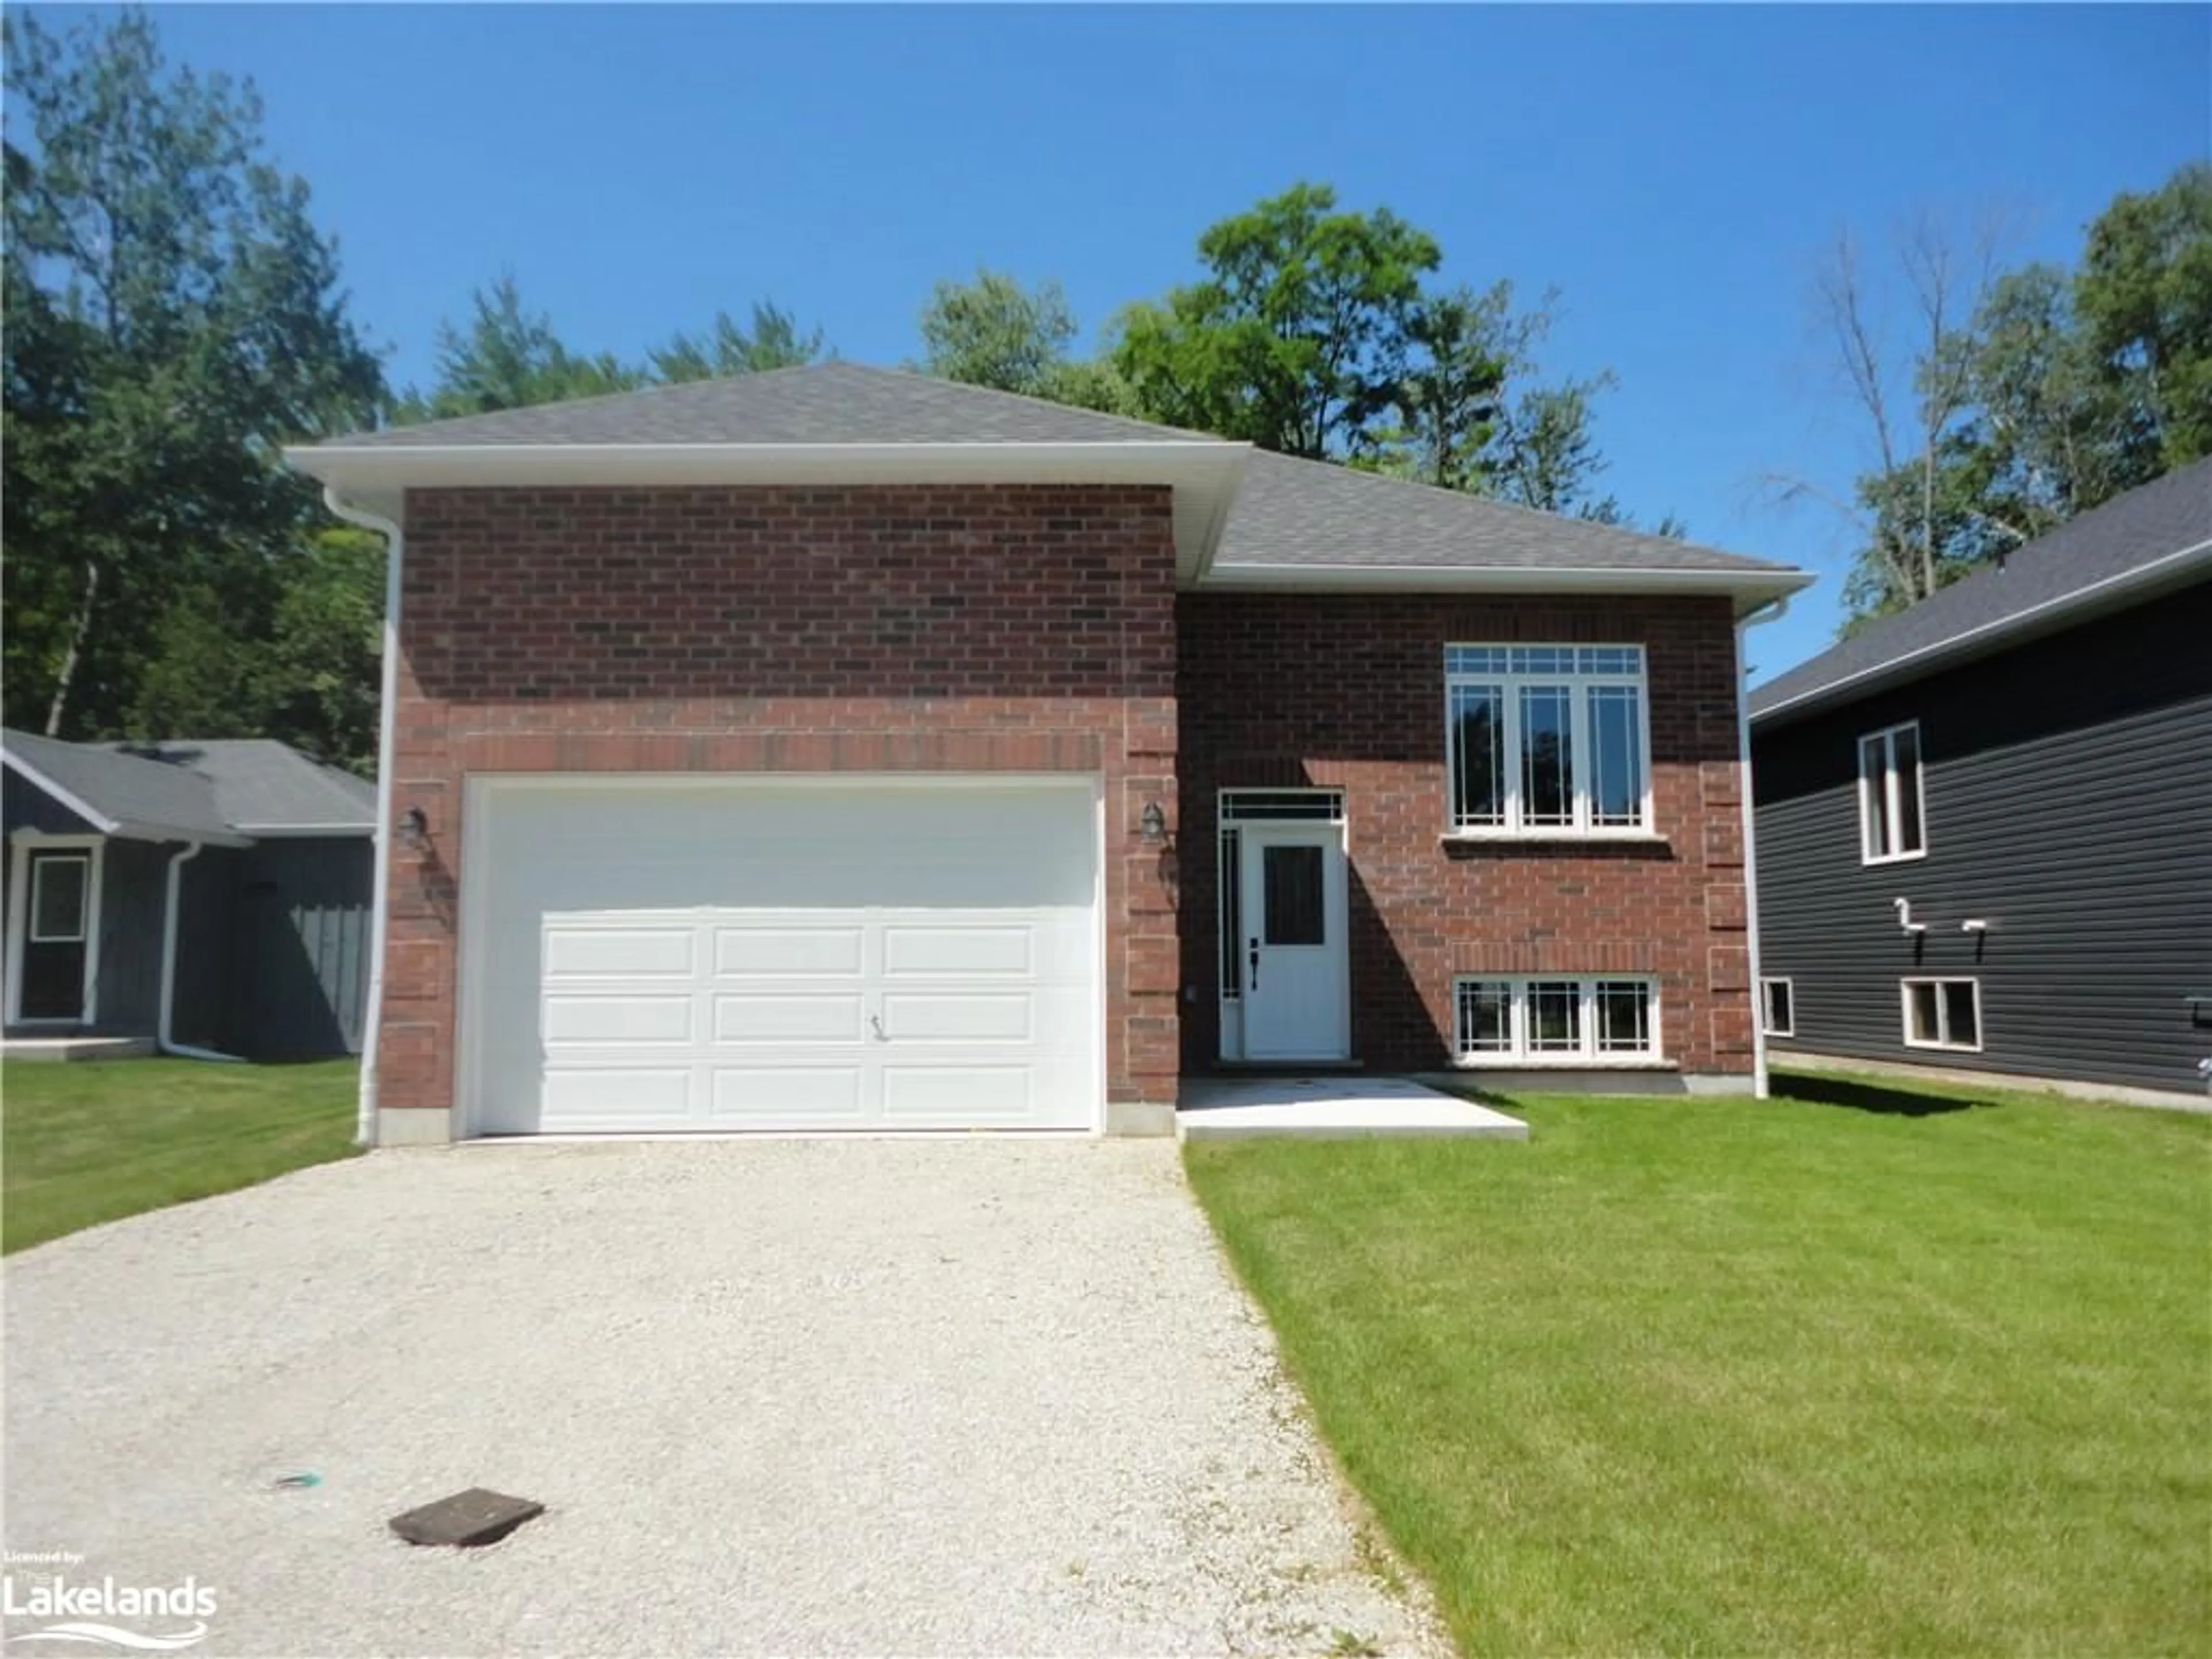 Home with brick exterior material for 14 56th St, Wasaga Beach Ontario L9Z 1W5